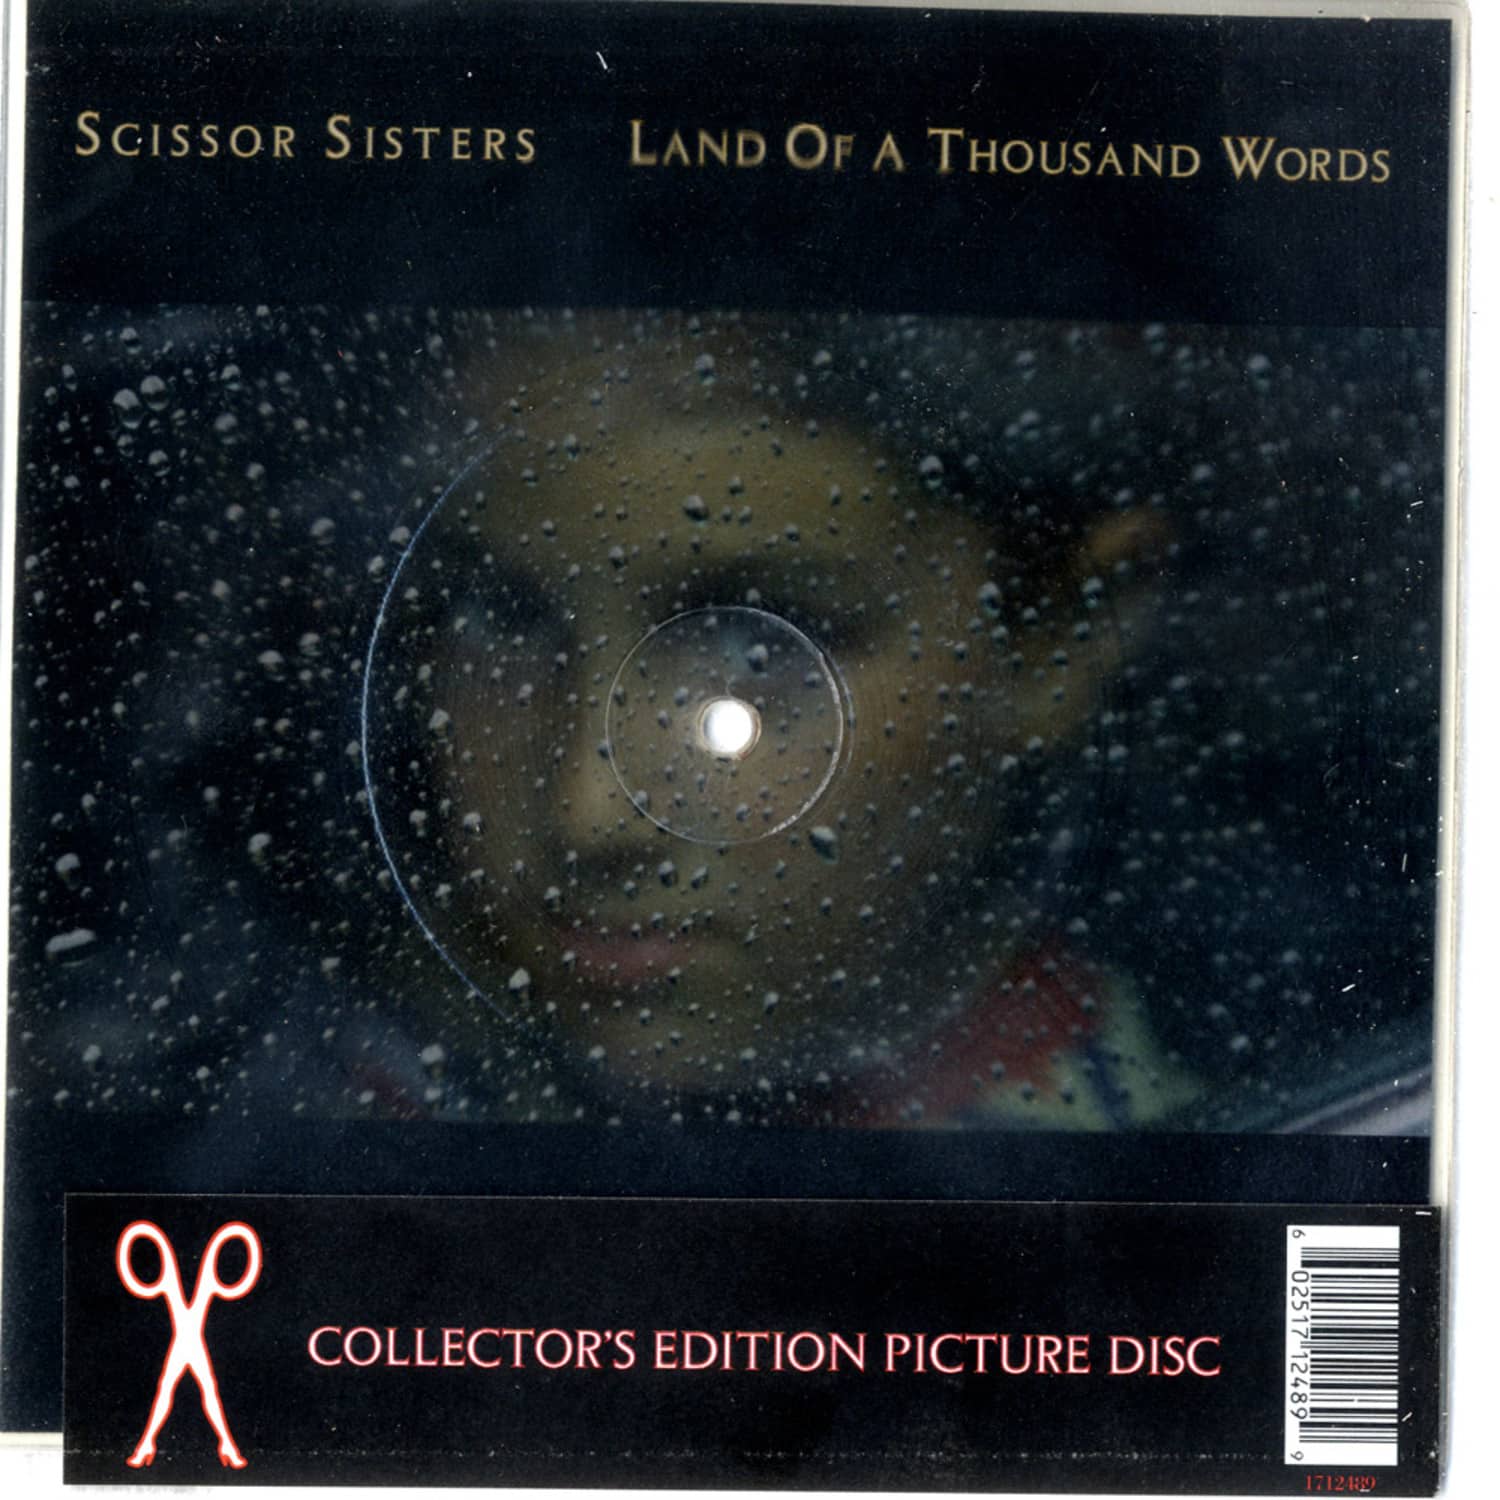 Scissor Sisters - LAND OF A THOUSAND WORDS 